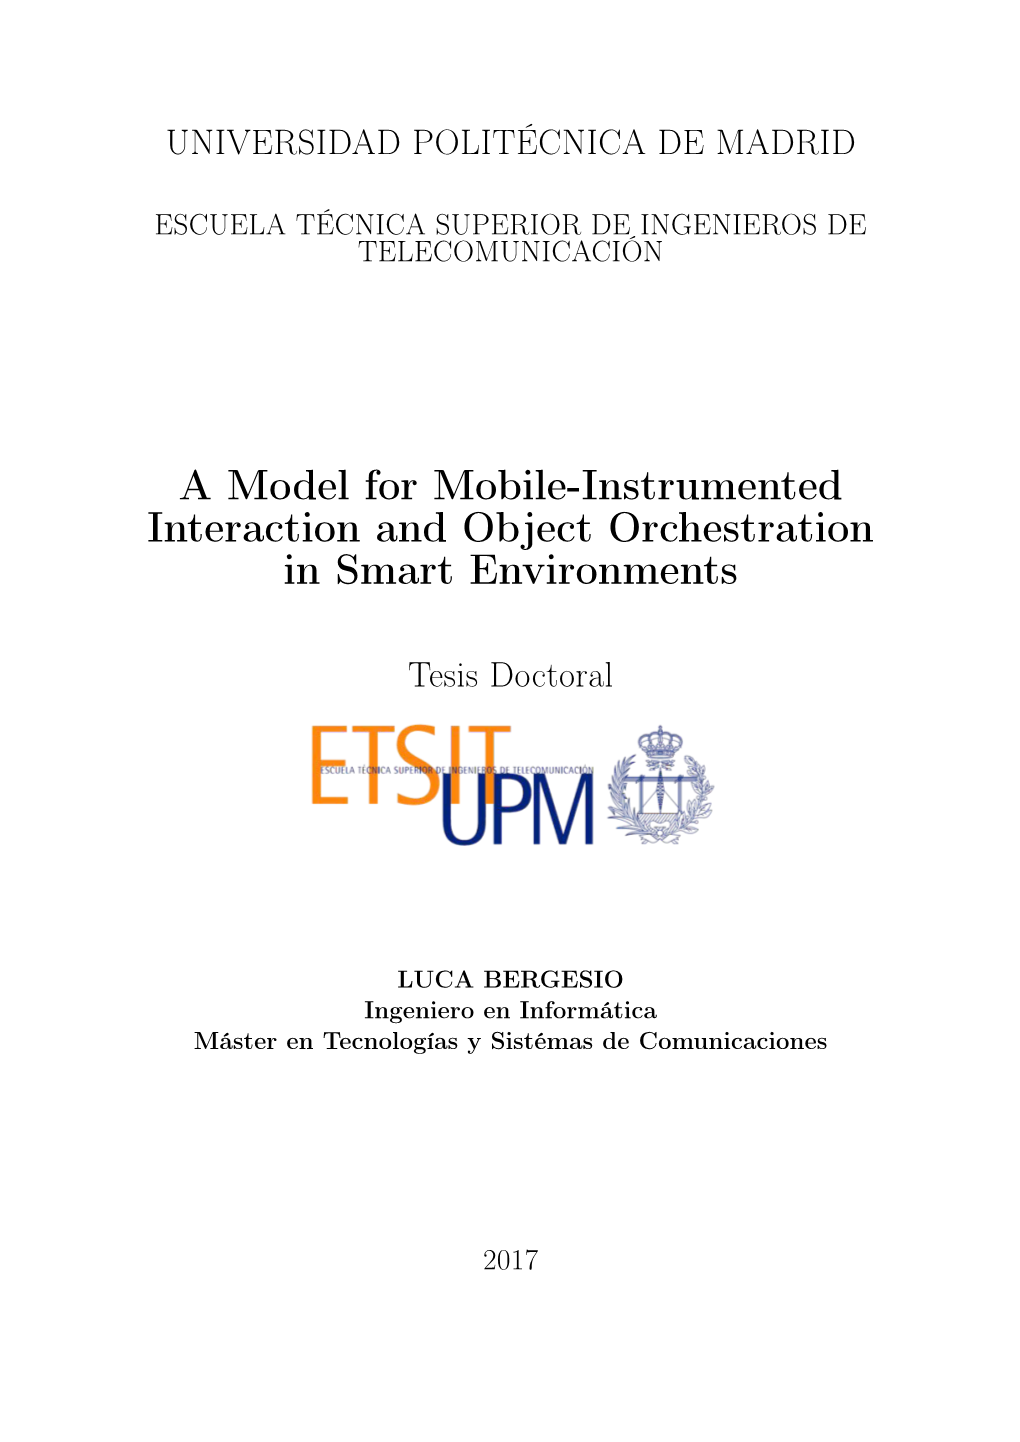 A Model for Mobile-Instrumented Interaction and Object Orchestration in Smart Environments